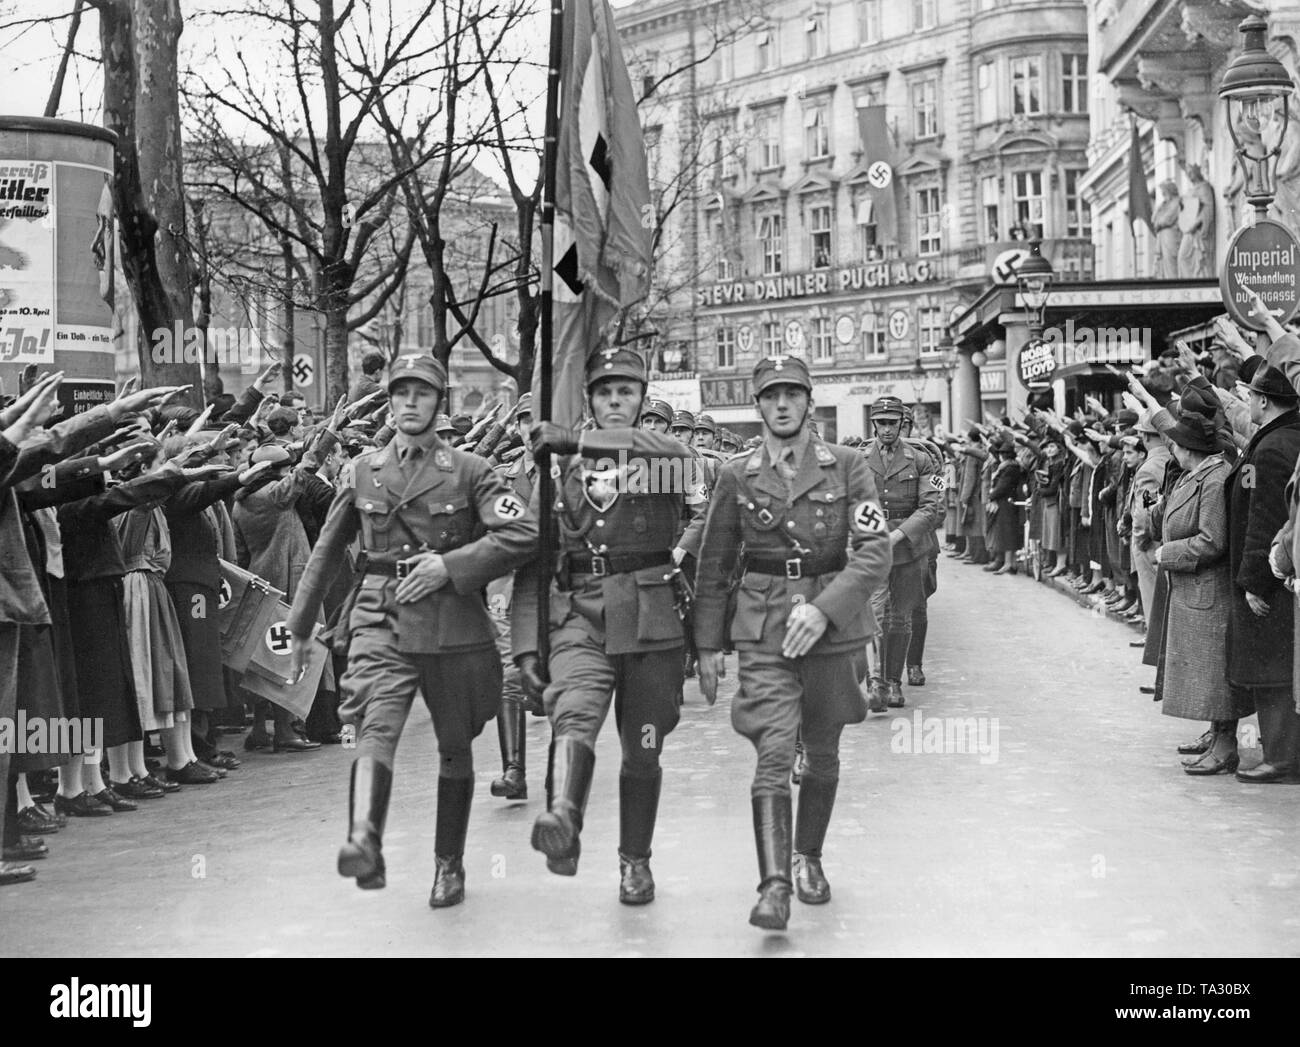 After the annexation of Austria to the German Reich, the Austrian legions return to Austria. The SA men march in front of the Vienna Hotel Imperial. In the background the lettering: 'Steyr Daimler Puch A.G.'. Stock Photo